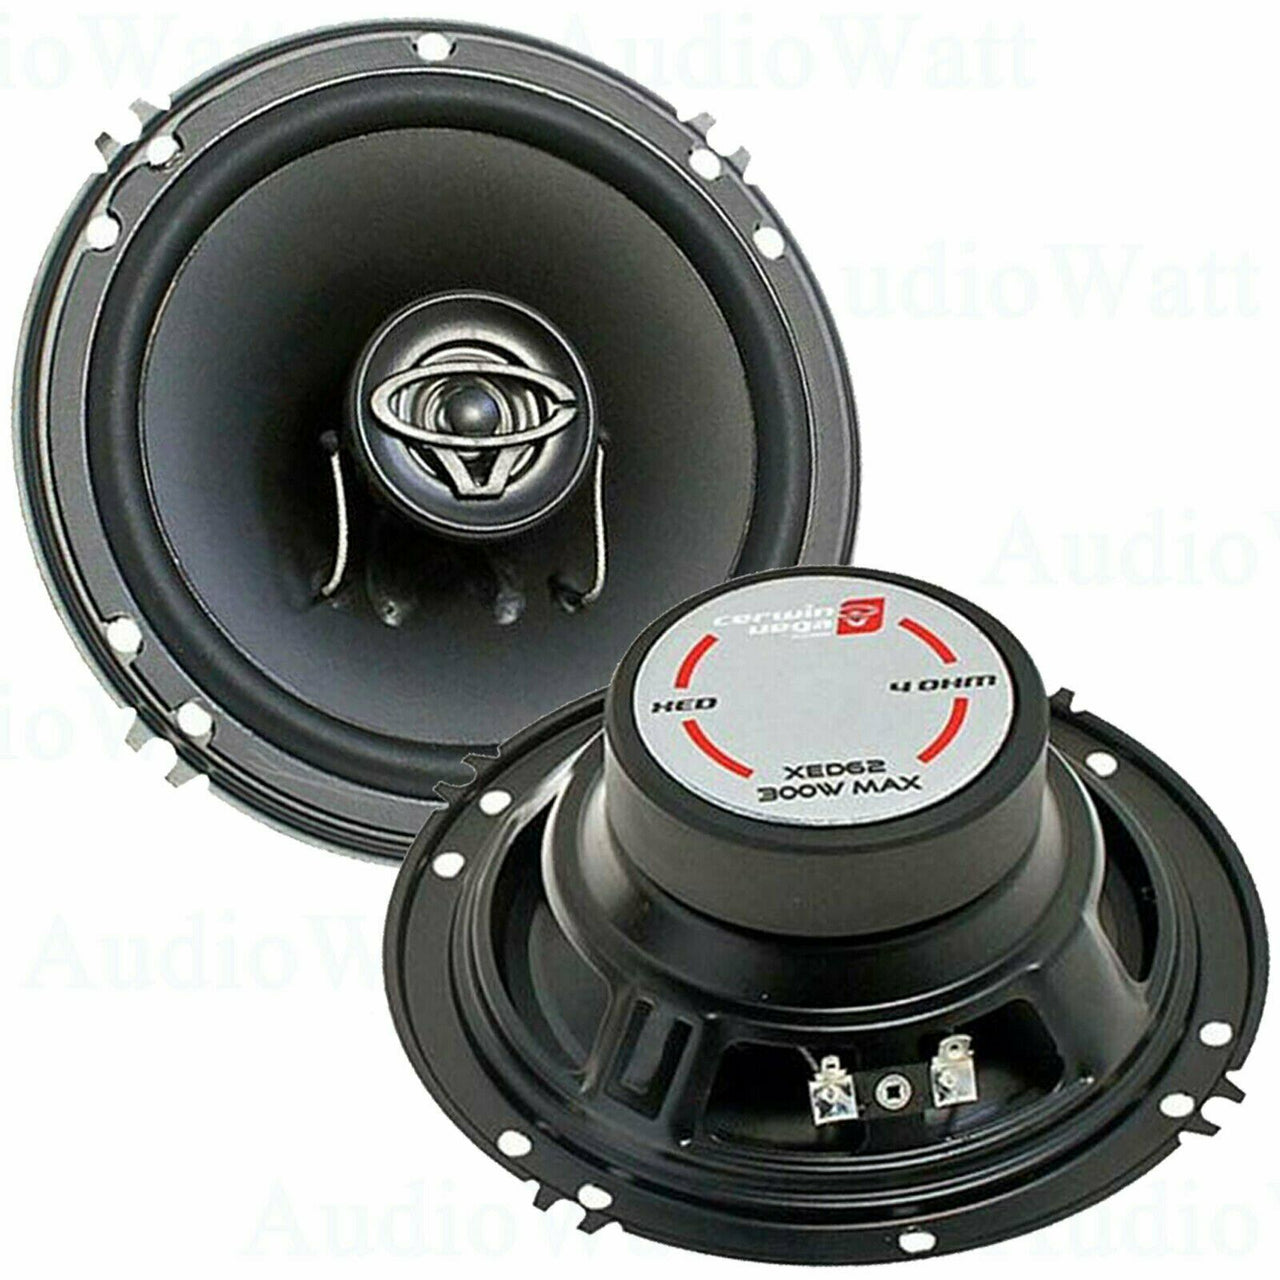 Cerwin Vega Mbile XED62 <br/> 300W 6.5" XED Series 2-Way Coaxial Car Speakers